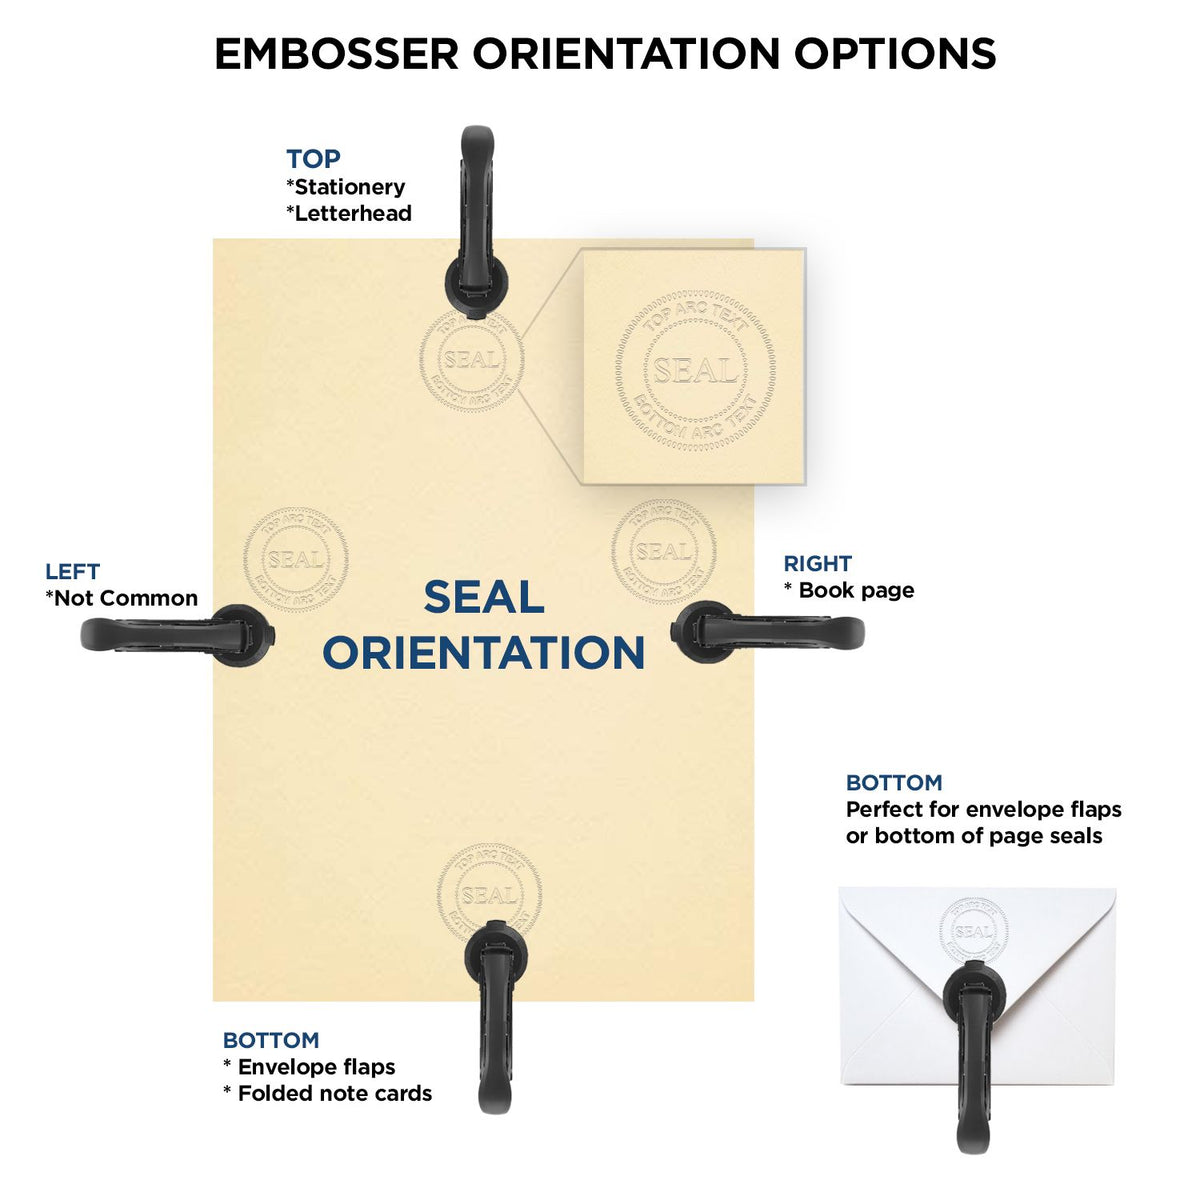 An infographic for the Gift New Jersey Land Surveyor Seal showing embosser orientation, this is showing examples of a top, bottom, right and left insert.